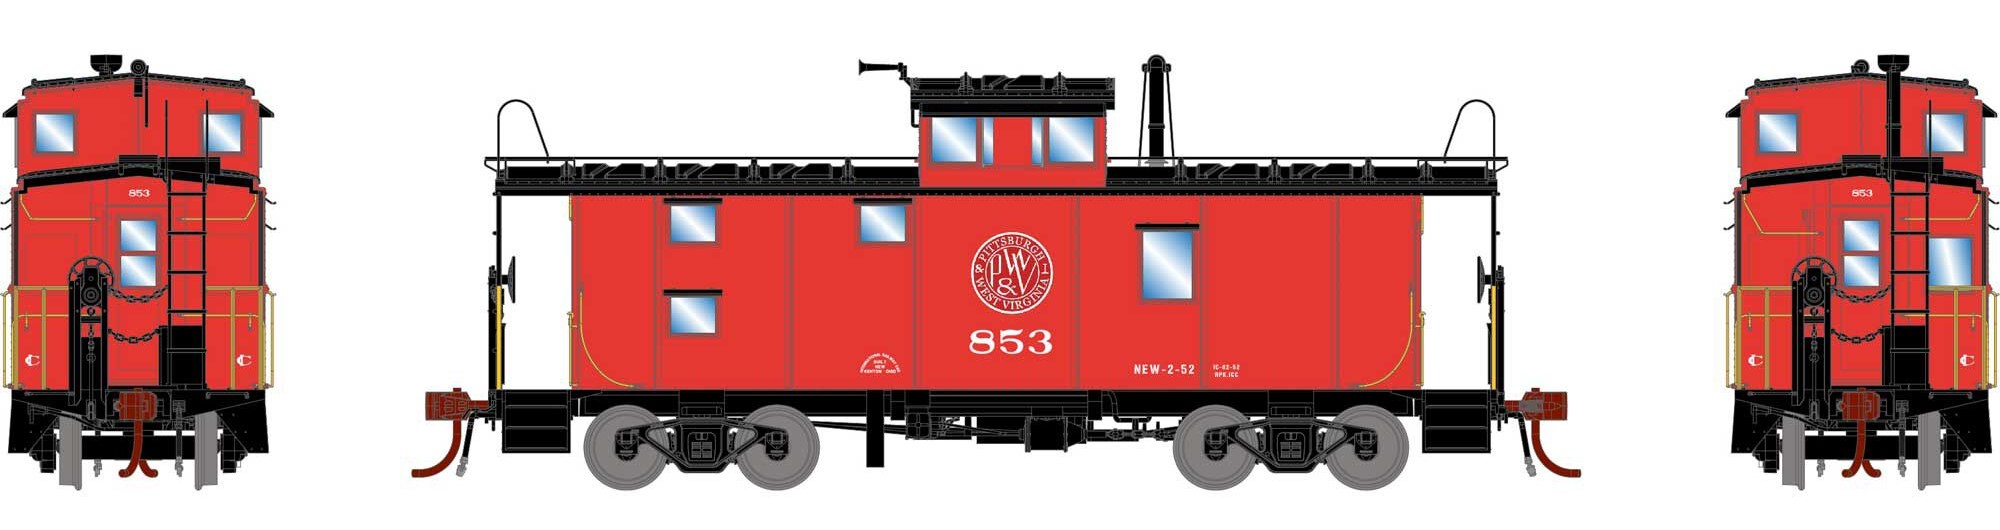 Athearn Genesis HO ATHG78587 DCC/NCE Decoder Equipped ICC Caboose with Lights Pittsburgh & West Virginia P&WV #853